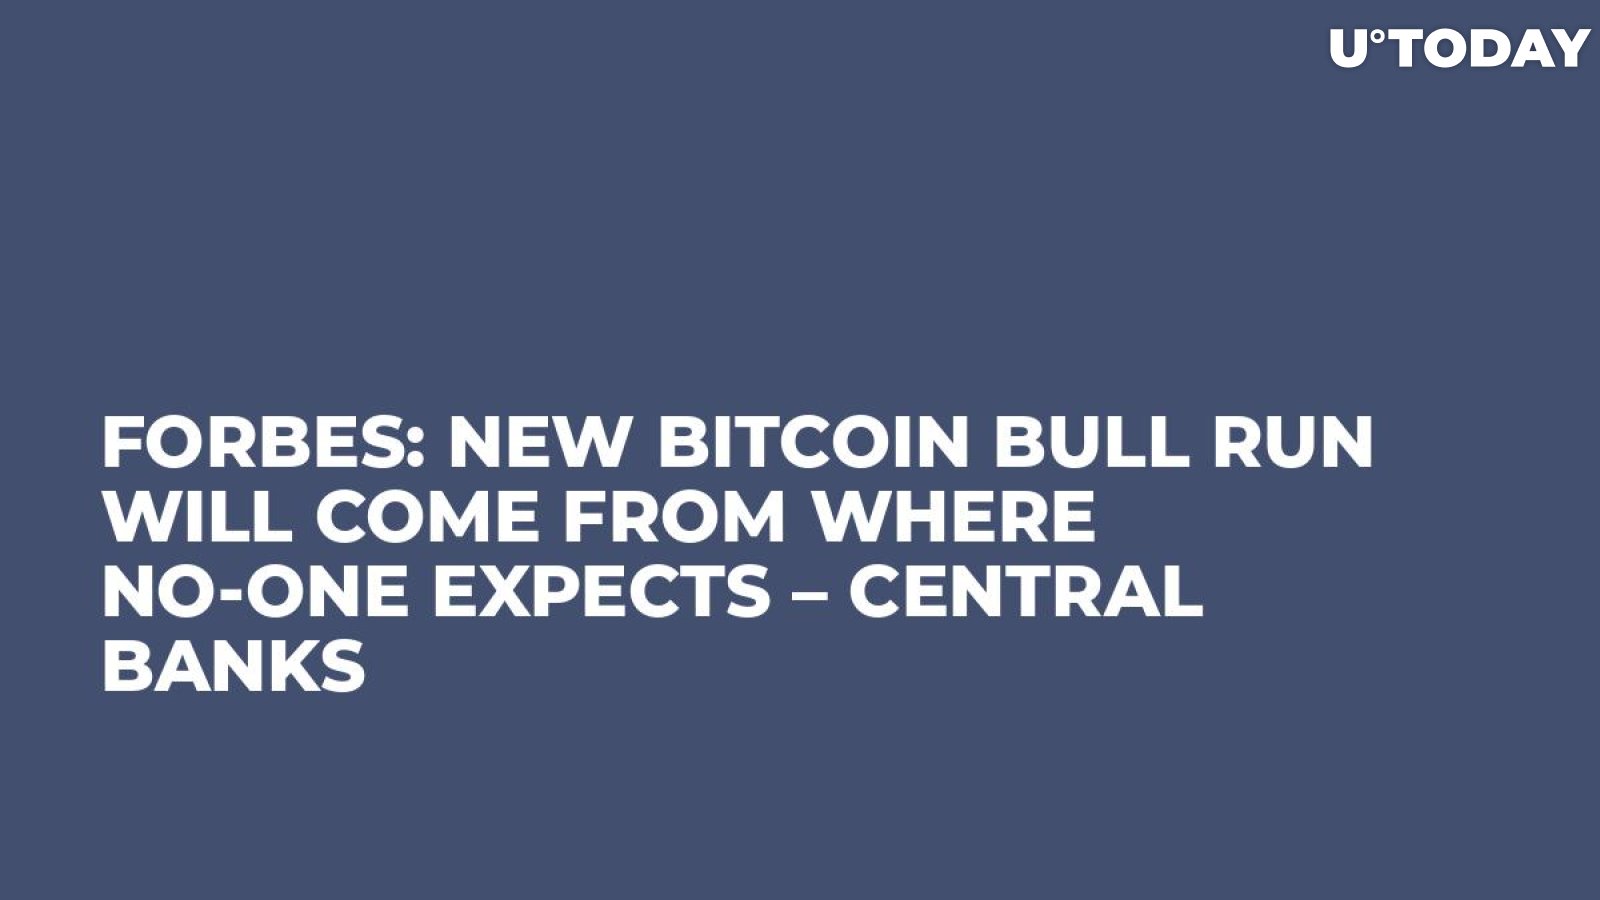 Forbes: New Bitcoin Bull Run Will Come from Where No-One Expects – Central Banks